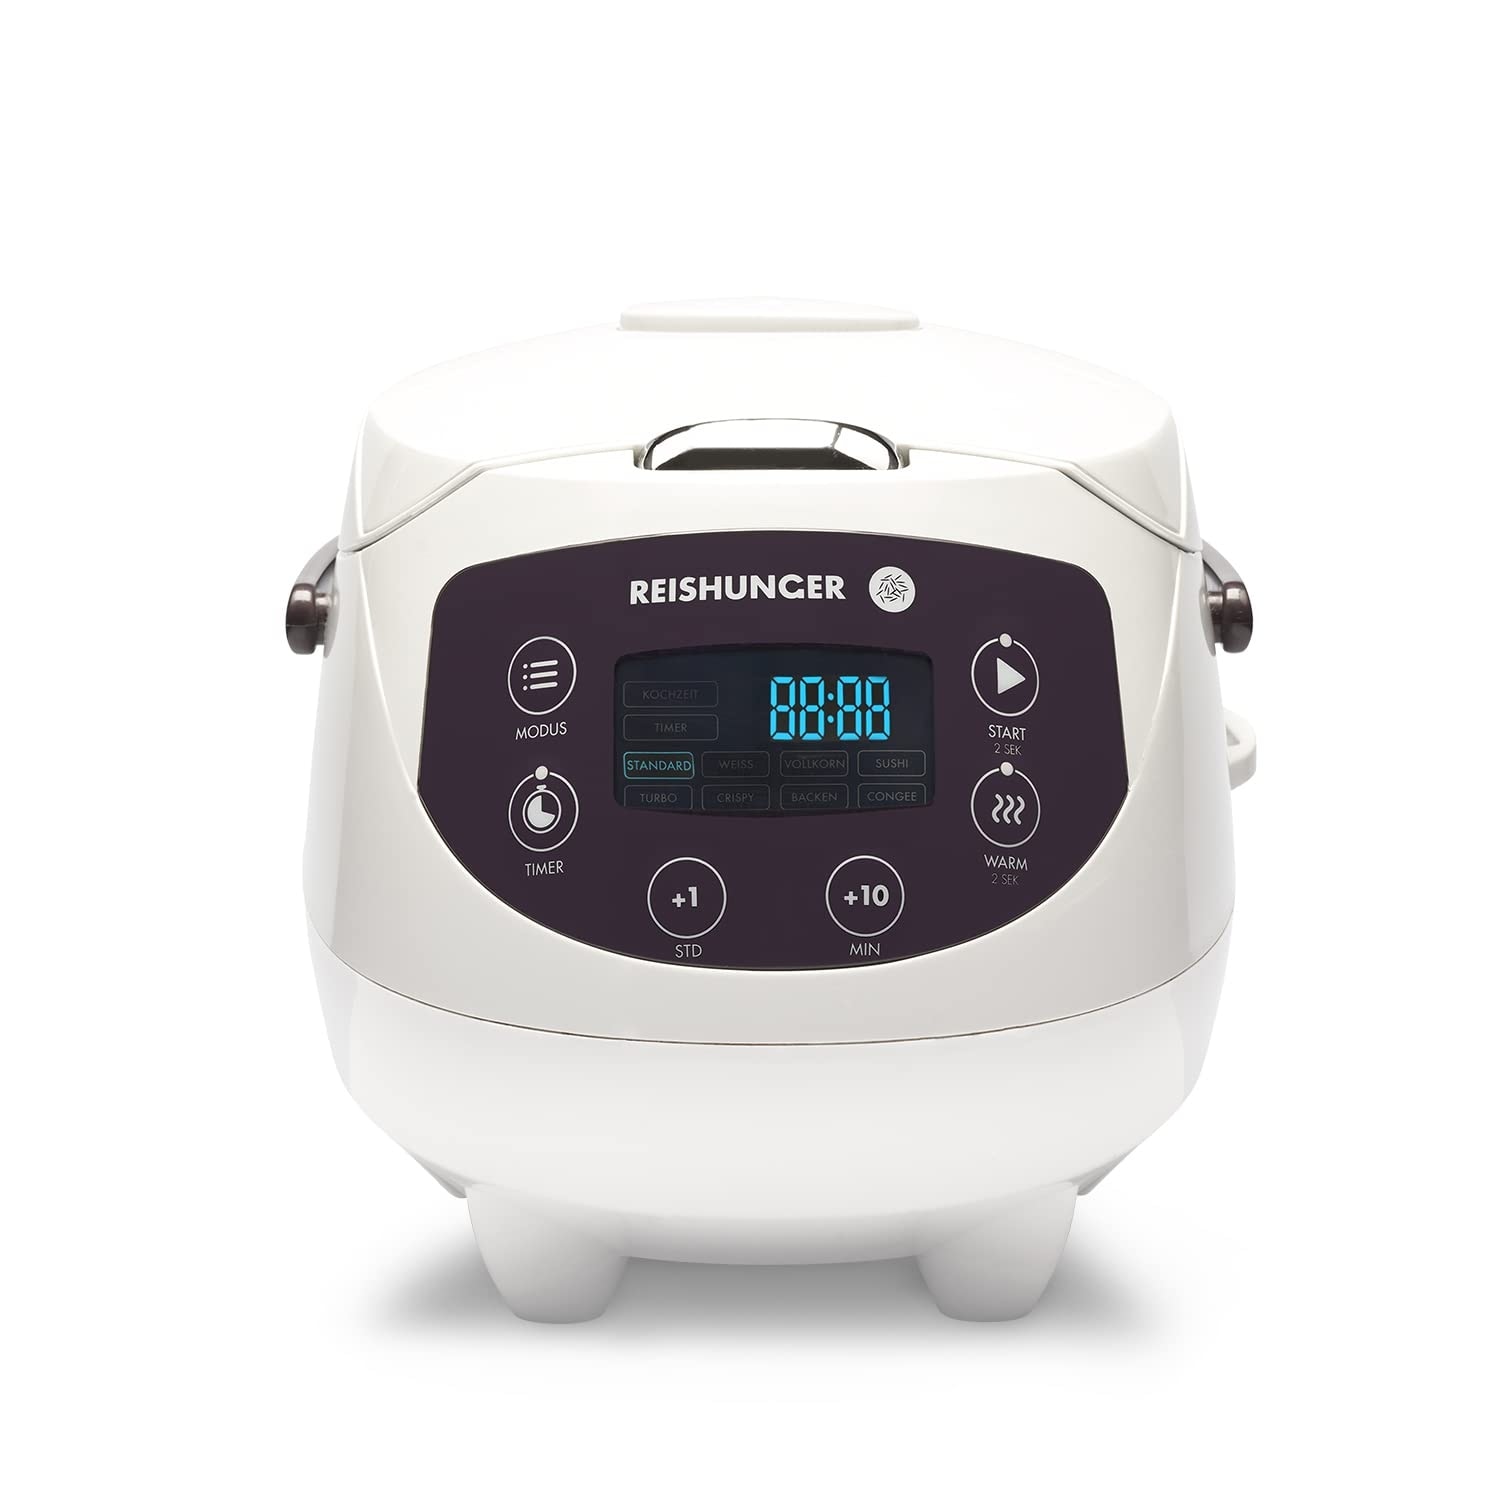 Digital Mini Rice Cooker & Steamer, with Keep-Warm Function